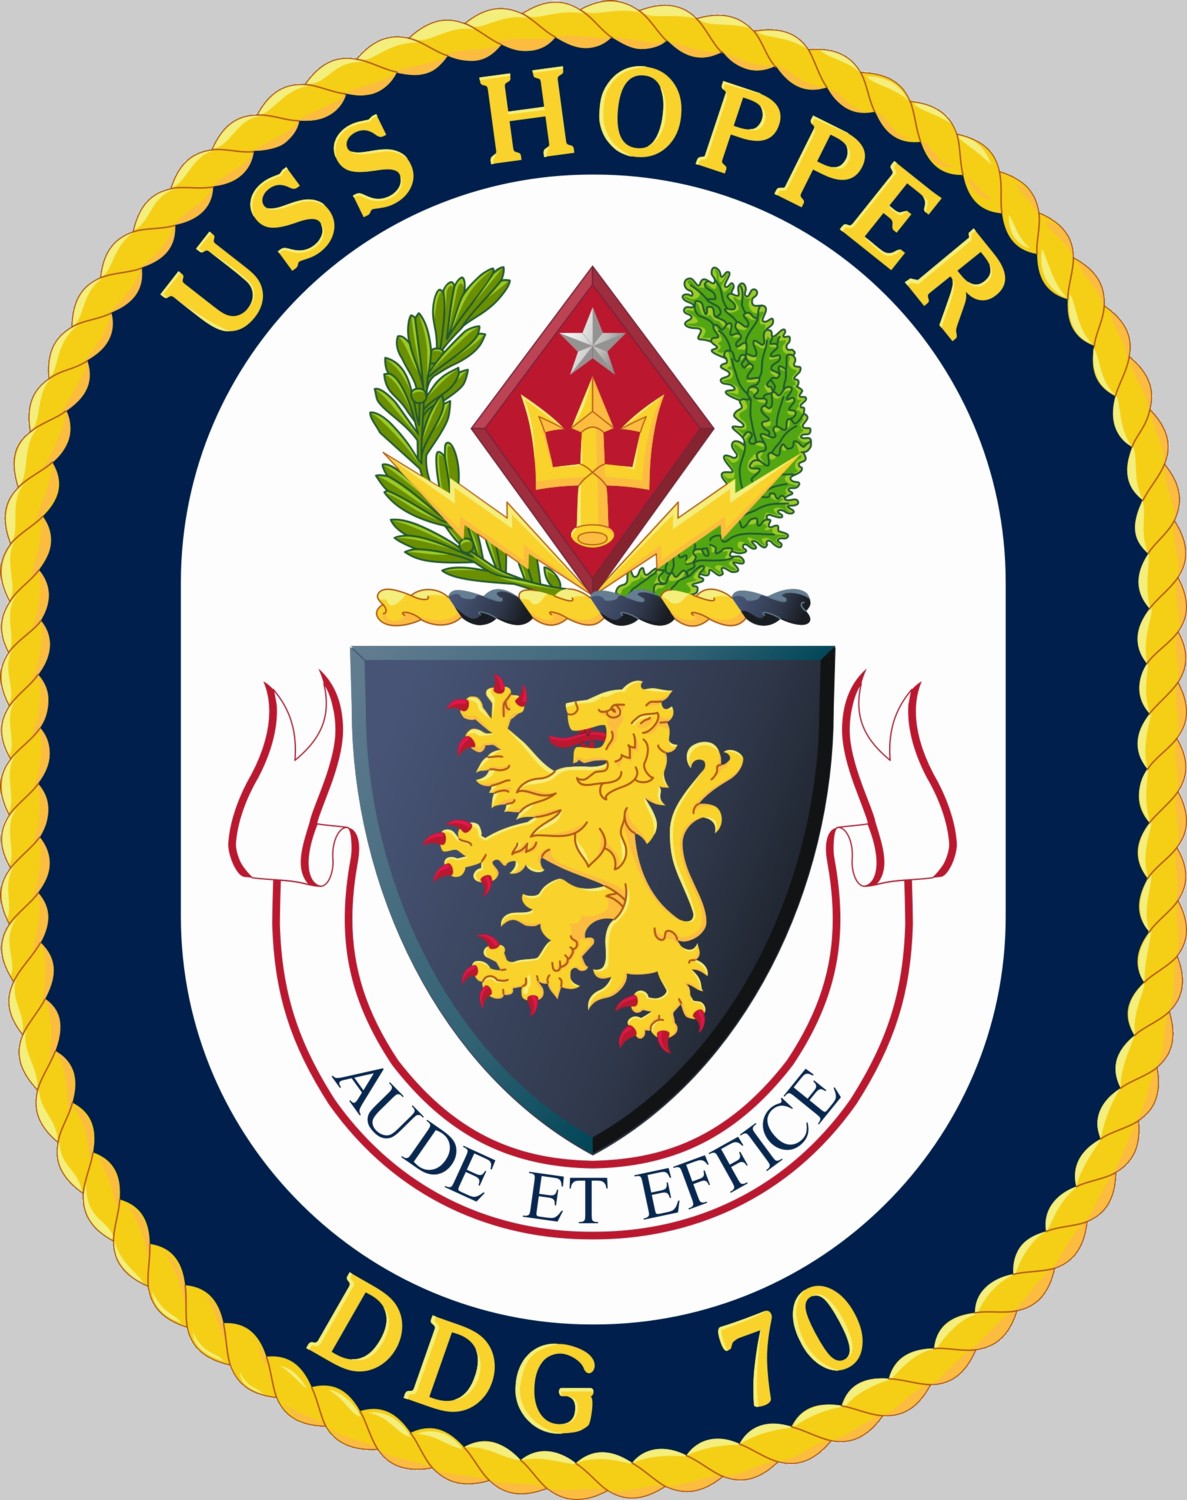 ddg-70 uss hopper insignia crest patch badge guided missile destroyer us navy 02x